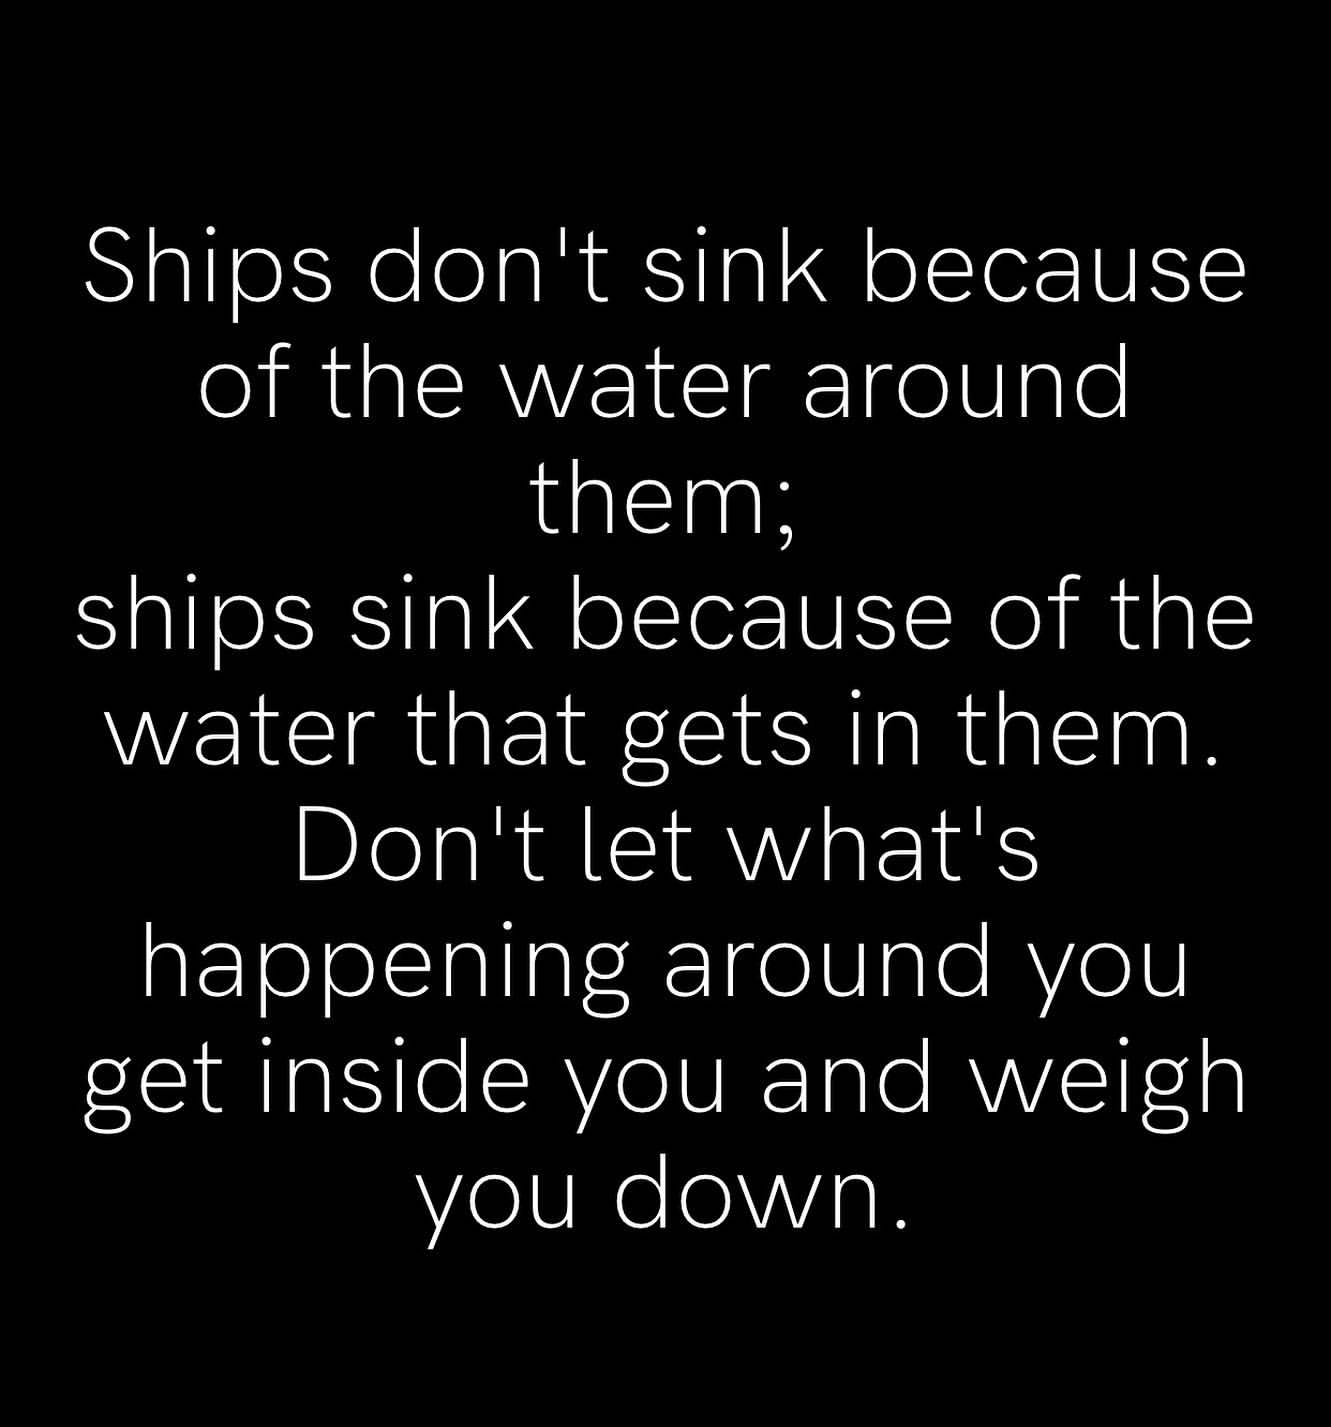 Ships don't sink because of the water around them; ships sink because of the water that gets in them. Don't let what's happening around you get inside you and weigh you down.